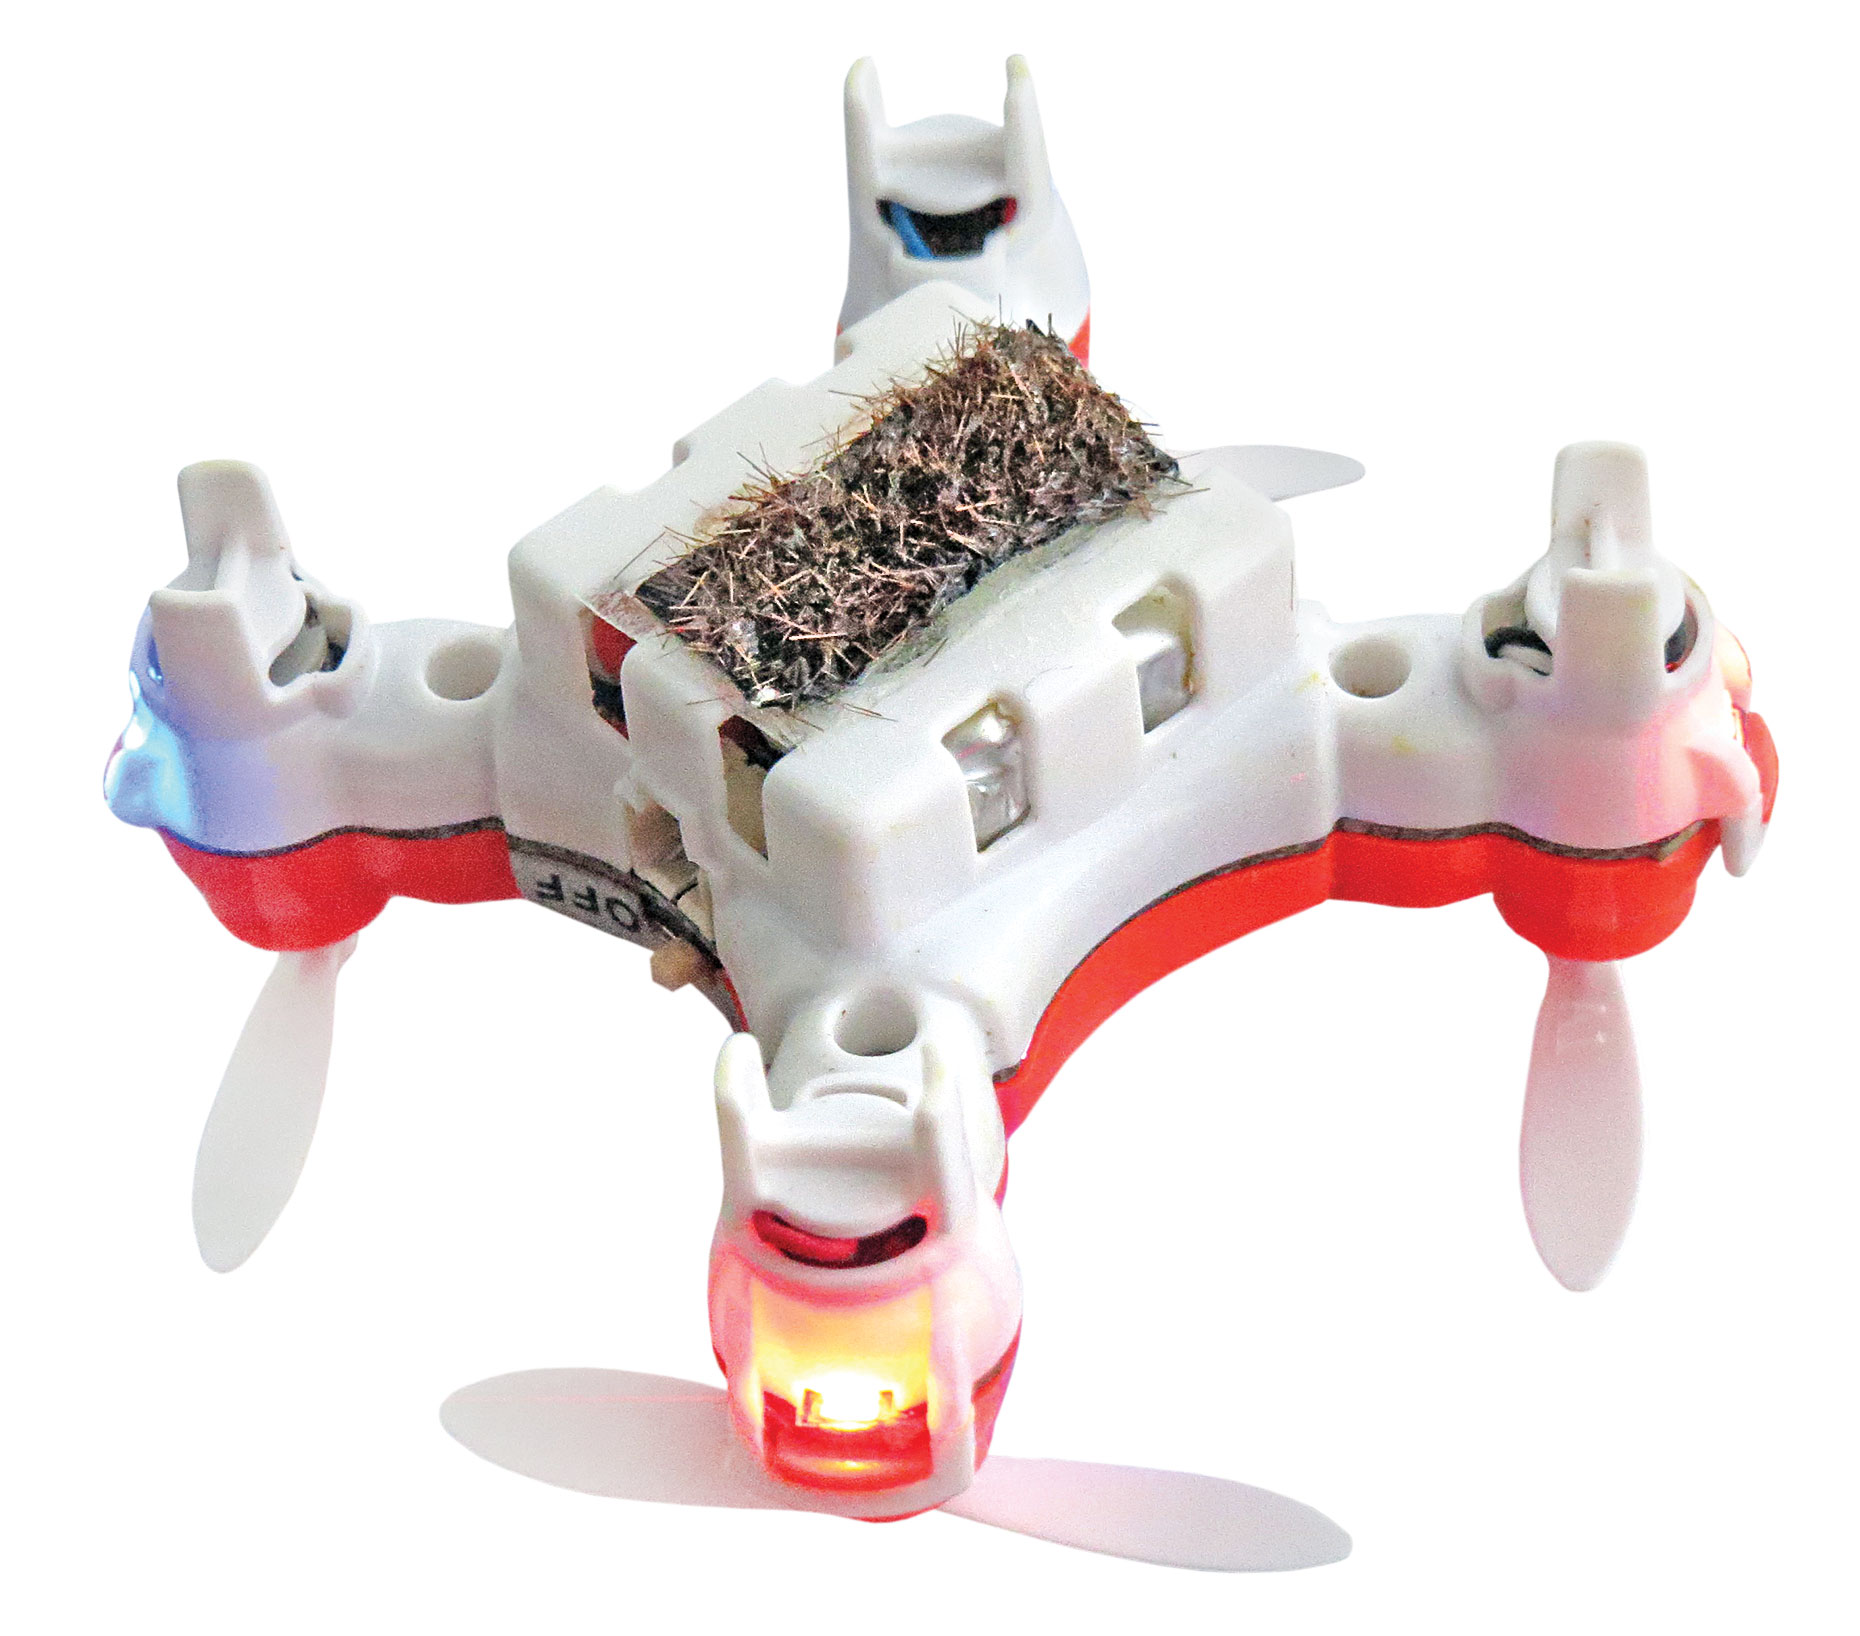 kommentator liner kommando This Tiny Drone Can Pollinate Flowers Like a Bee - Bloomberg